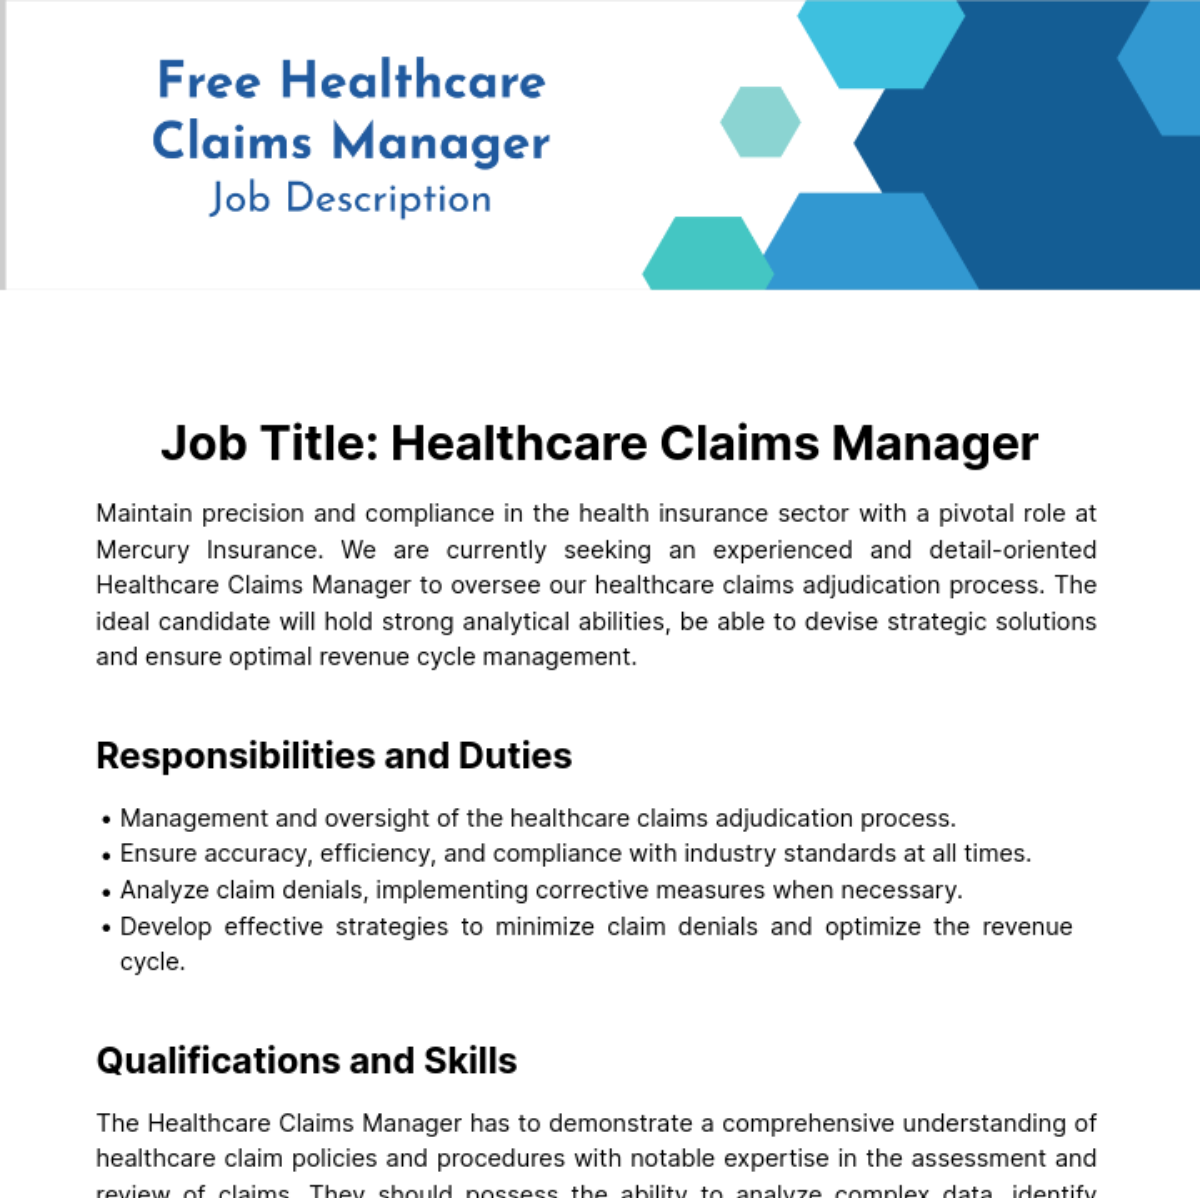 Free Healthcare Claims Manager Job Description Template